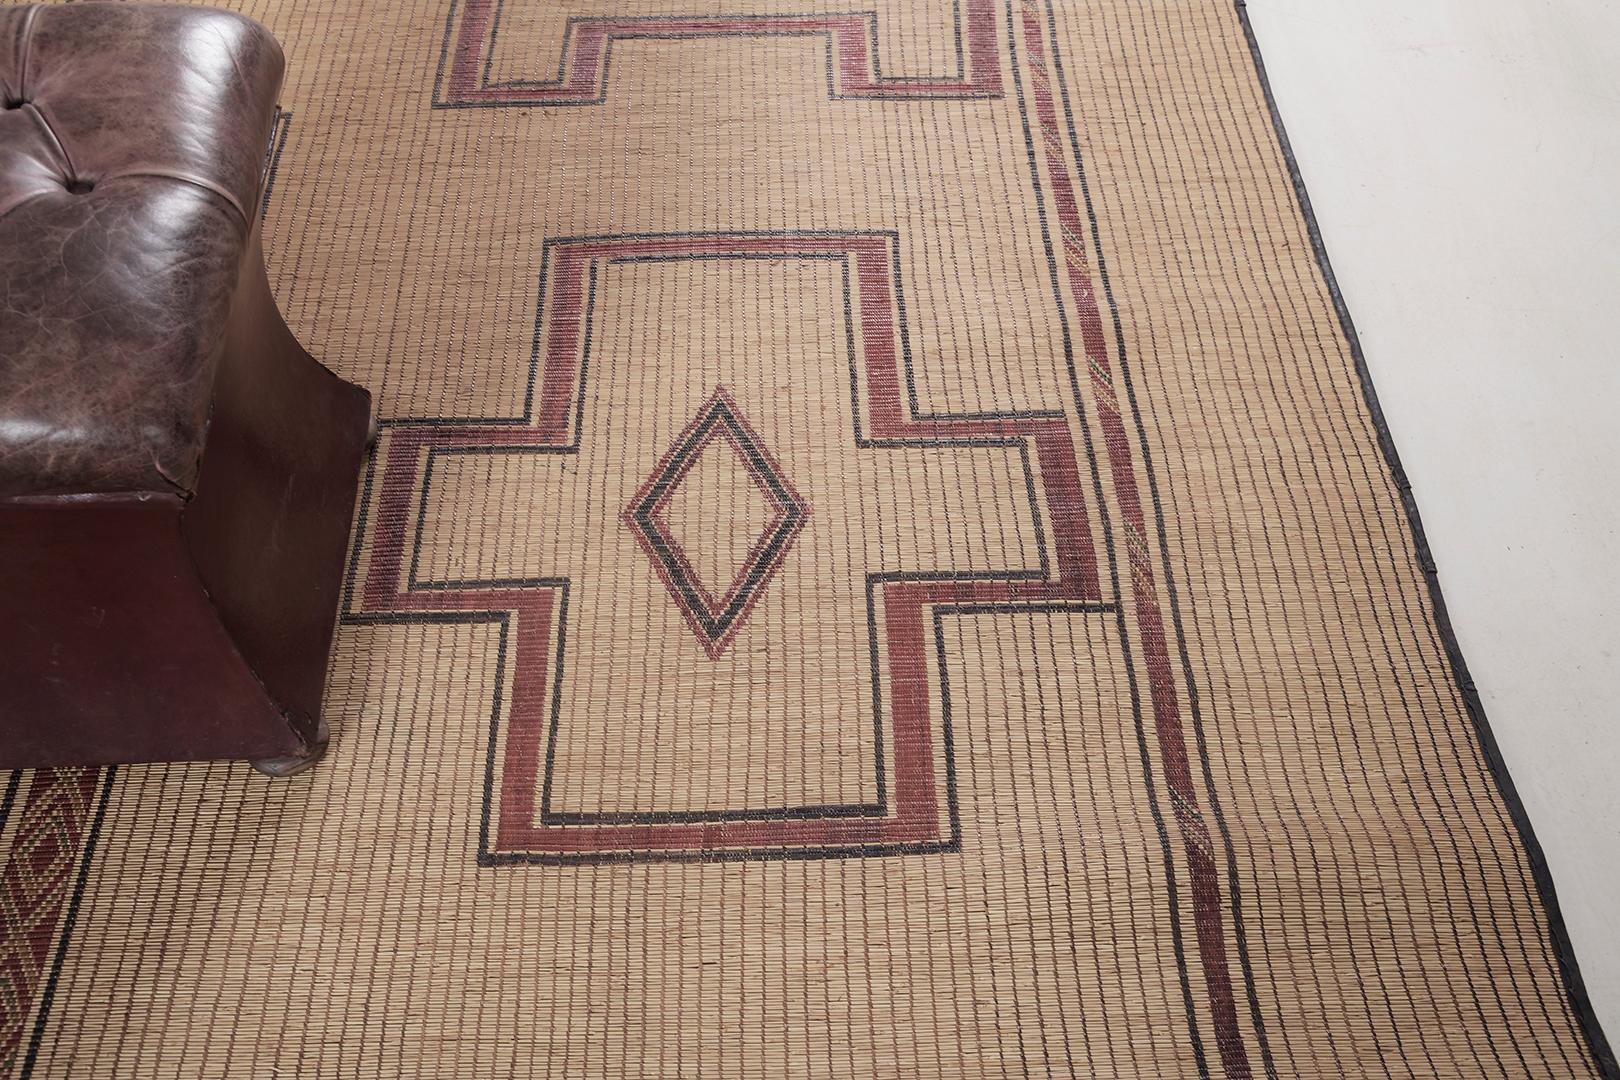 Tuareg mats are known for their remarkable patterns and how they narrate their story through a beautiful masterpiece made out of reed and leather. Lozenge Berber Symbols, Yaz, and geometrical Lion's Paw are featured and focused in this work of art.